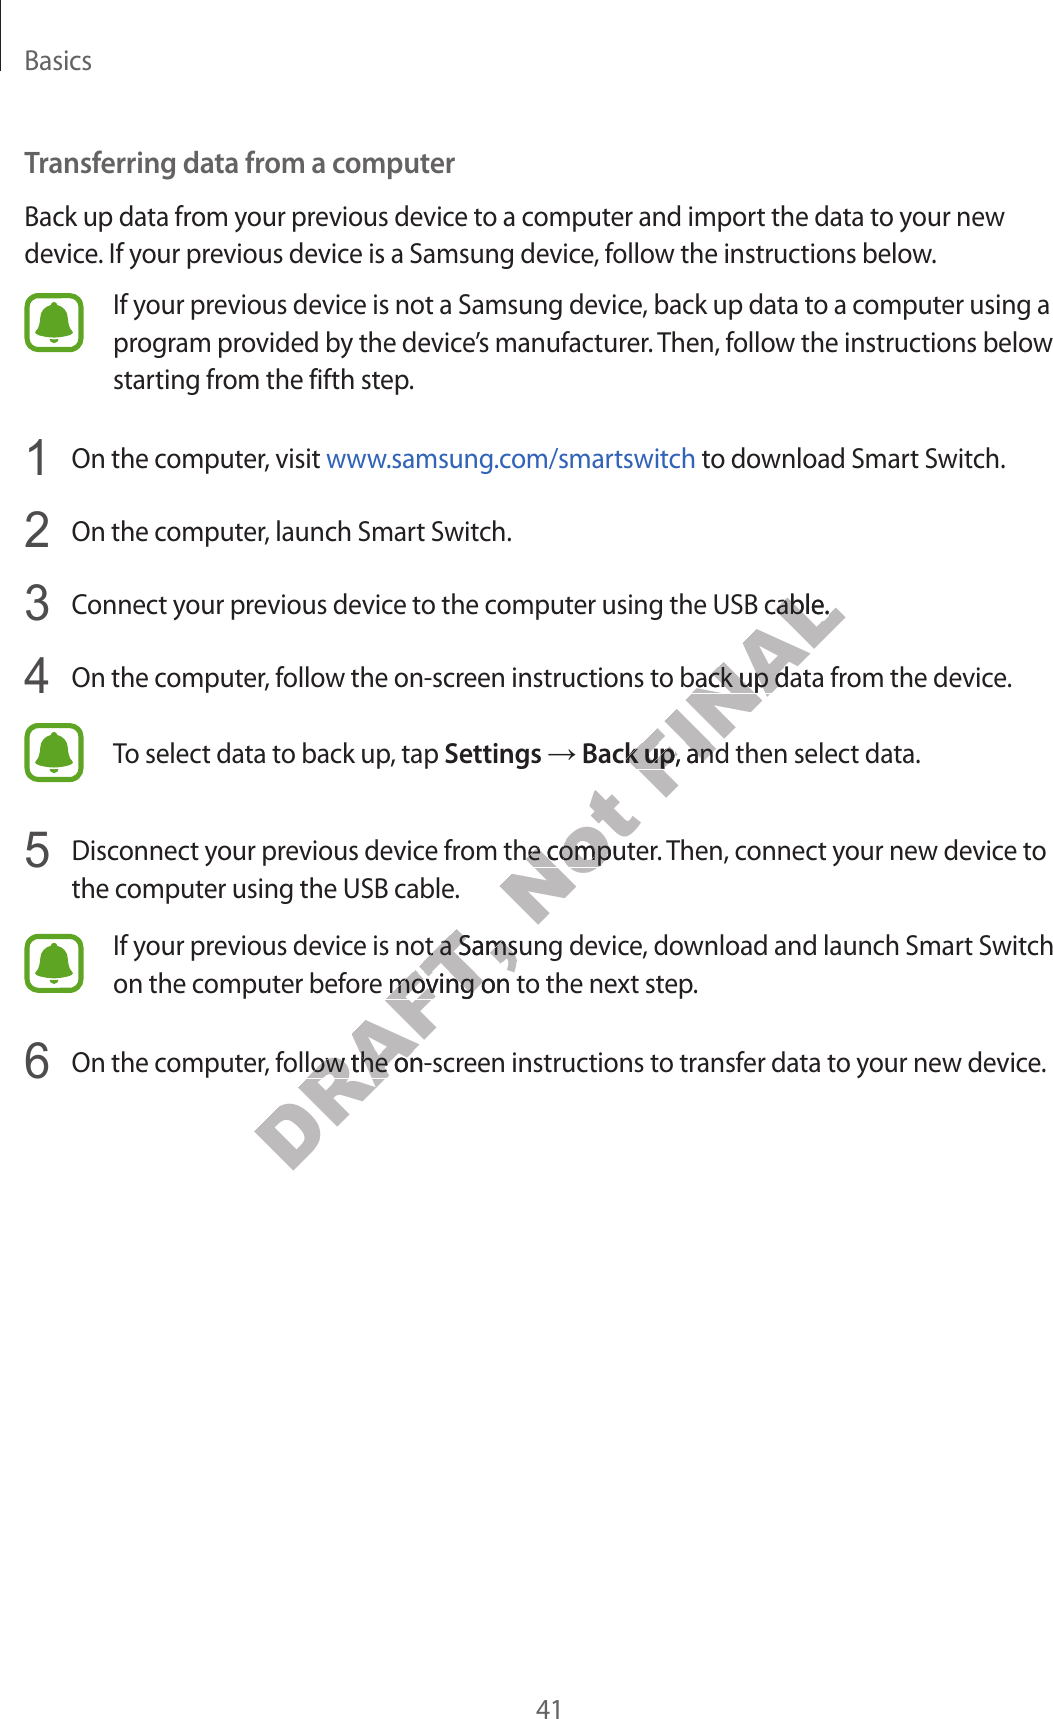 Basics41Transferring data fr om a c omputerBack up data from y our pr evious devic e to a c omput er and import the data to your new device . If your pr evious device is a Samsung device, follow the instructions below.If your previous device is not a Samsung devic e , back up data t o a comput er using a progr am pr o vided by the devic e’s manufacturer. T hen, f ollo w the instructions below starting from the fifth step.1  On the computer, visit www.samsung.com/smartswitch to download Smart Switch.2  On the computer, launch Smart Switch.3  Connect your pr evious device t o the comput er using the USB cable .4  On the computer, follow the on-scr een instructions to back up data fr om the device.To select data to back up , tap Settings → Back up, and then select data.5  Disconnect your previous devic e fr om the comput er. Then, connect your new device to the computer using the USB cable .If your previous device is not a Samsung devic e , do wnload and launch Smart Switch on the computer bef or e mo ving on t o the next step.6  On the computer, follow the on-scr een instructions to transf er da ta to y our new devic e .DRAFT, If your previous device is not a Samsung devic e , do wnload and launch Smart Switch DRAFT, If your previous device is not a Samsung devic e , do wnload and launch Smart Switch on the computer bef or e mo ving on t o the next step.DRAFT, on the computer bef or e mo ving on t o the next step.On the computer, follow the on-scr een instructions to transf er da ta to y our new devic e .DRAFT, On the computer, follow the on-scr een instructions to transf er da ta to y our new devic e .Not Disconnect your previous devic e fr om the comput er. Then, connect your new device to Not Disconnect your previous devic e fr om the comput er. Then, connect your new device to FINALConnect your pr evious device t o the comput er using the USB cable .FINALConnect your pr evious device t o the comput er using the USB cable .On the computer, follow the on-scr een instructions to back up data fr om the device.FINALOn the computer, follow the on-scr een instructions to back up data fr om the device.Back upFINALBack up, and then select data.FINAL, and then select data.